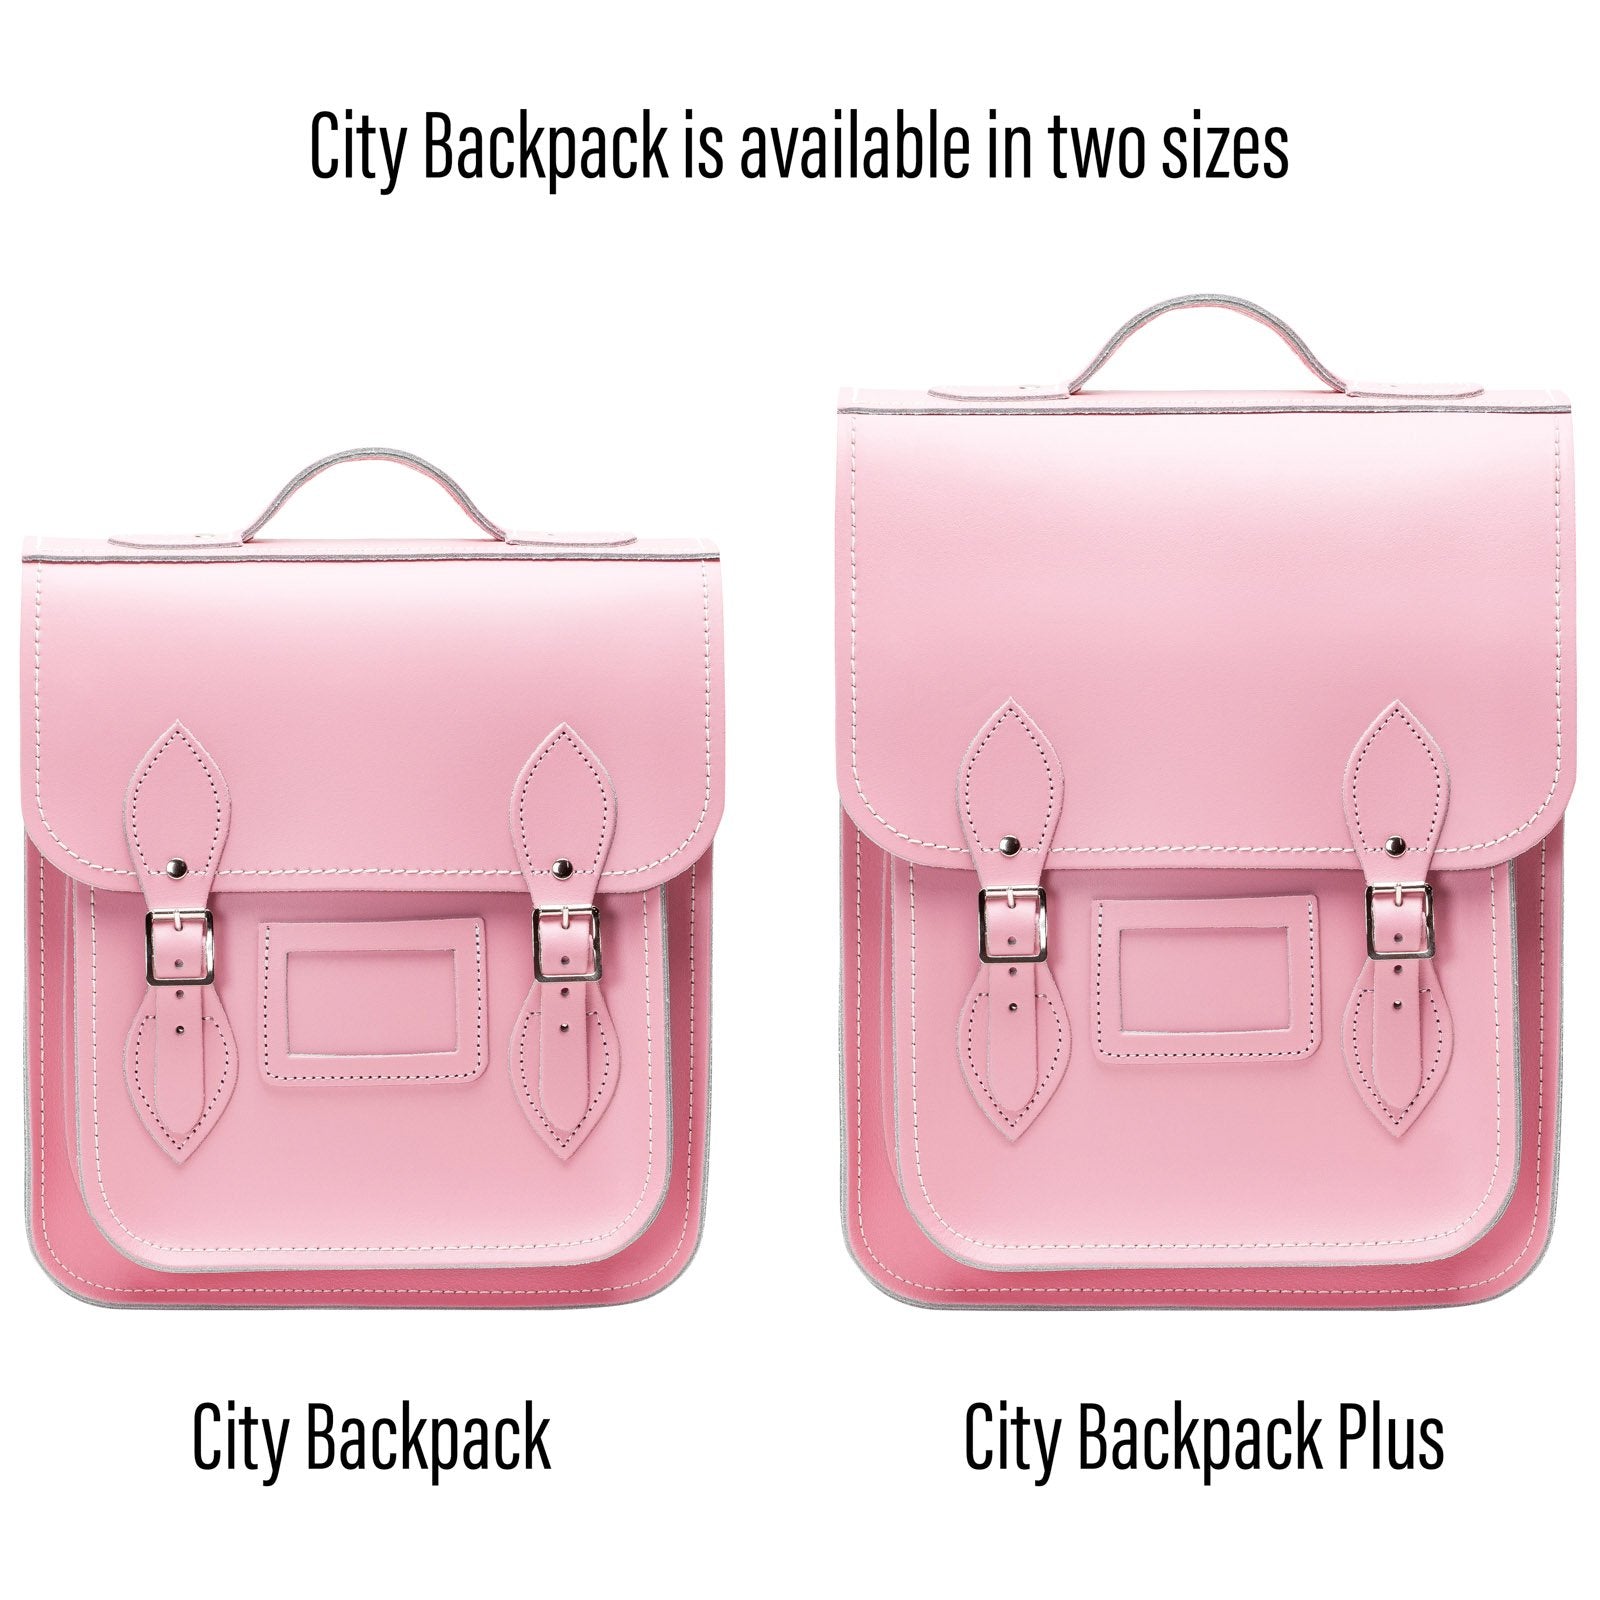 Handmade Leather City Backpack - Pastel Pink - Plus